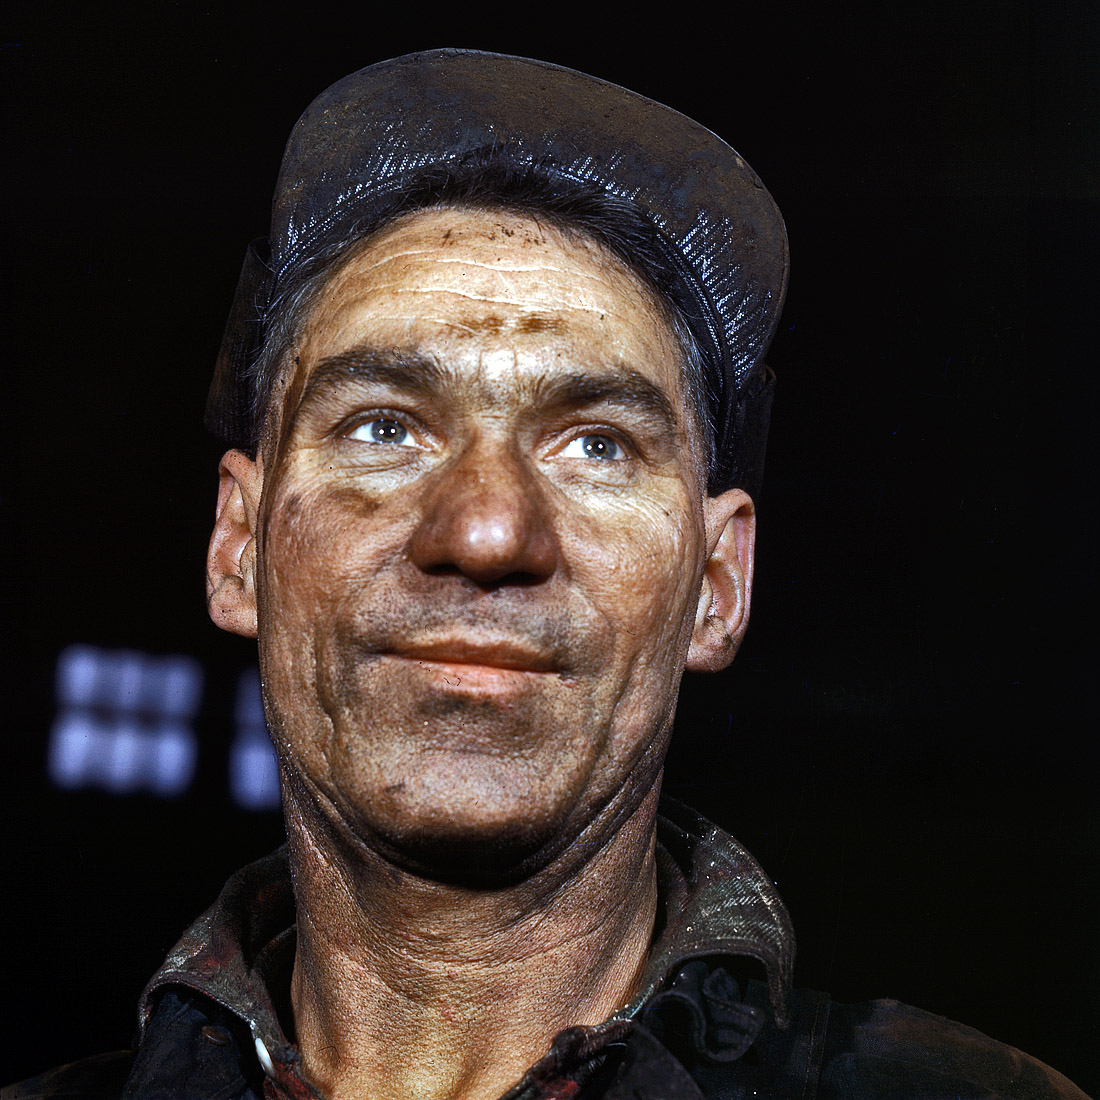 December 1942. Melrose Park, Illinois. Roy Nelin, a box packer in the Proviso Yard roundhouse of the Chicago & North Western R.R. View full size. 4x5 Kodachrome transparency by Jack Delano for the Office of War Information.